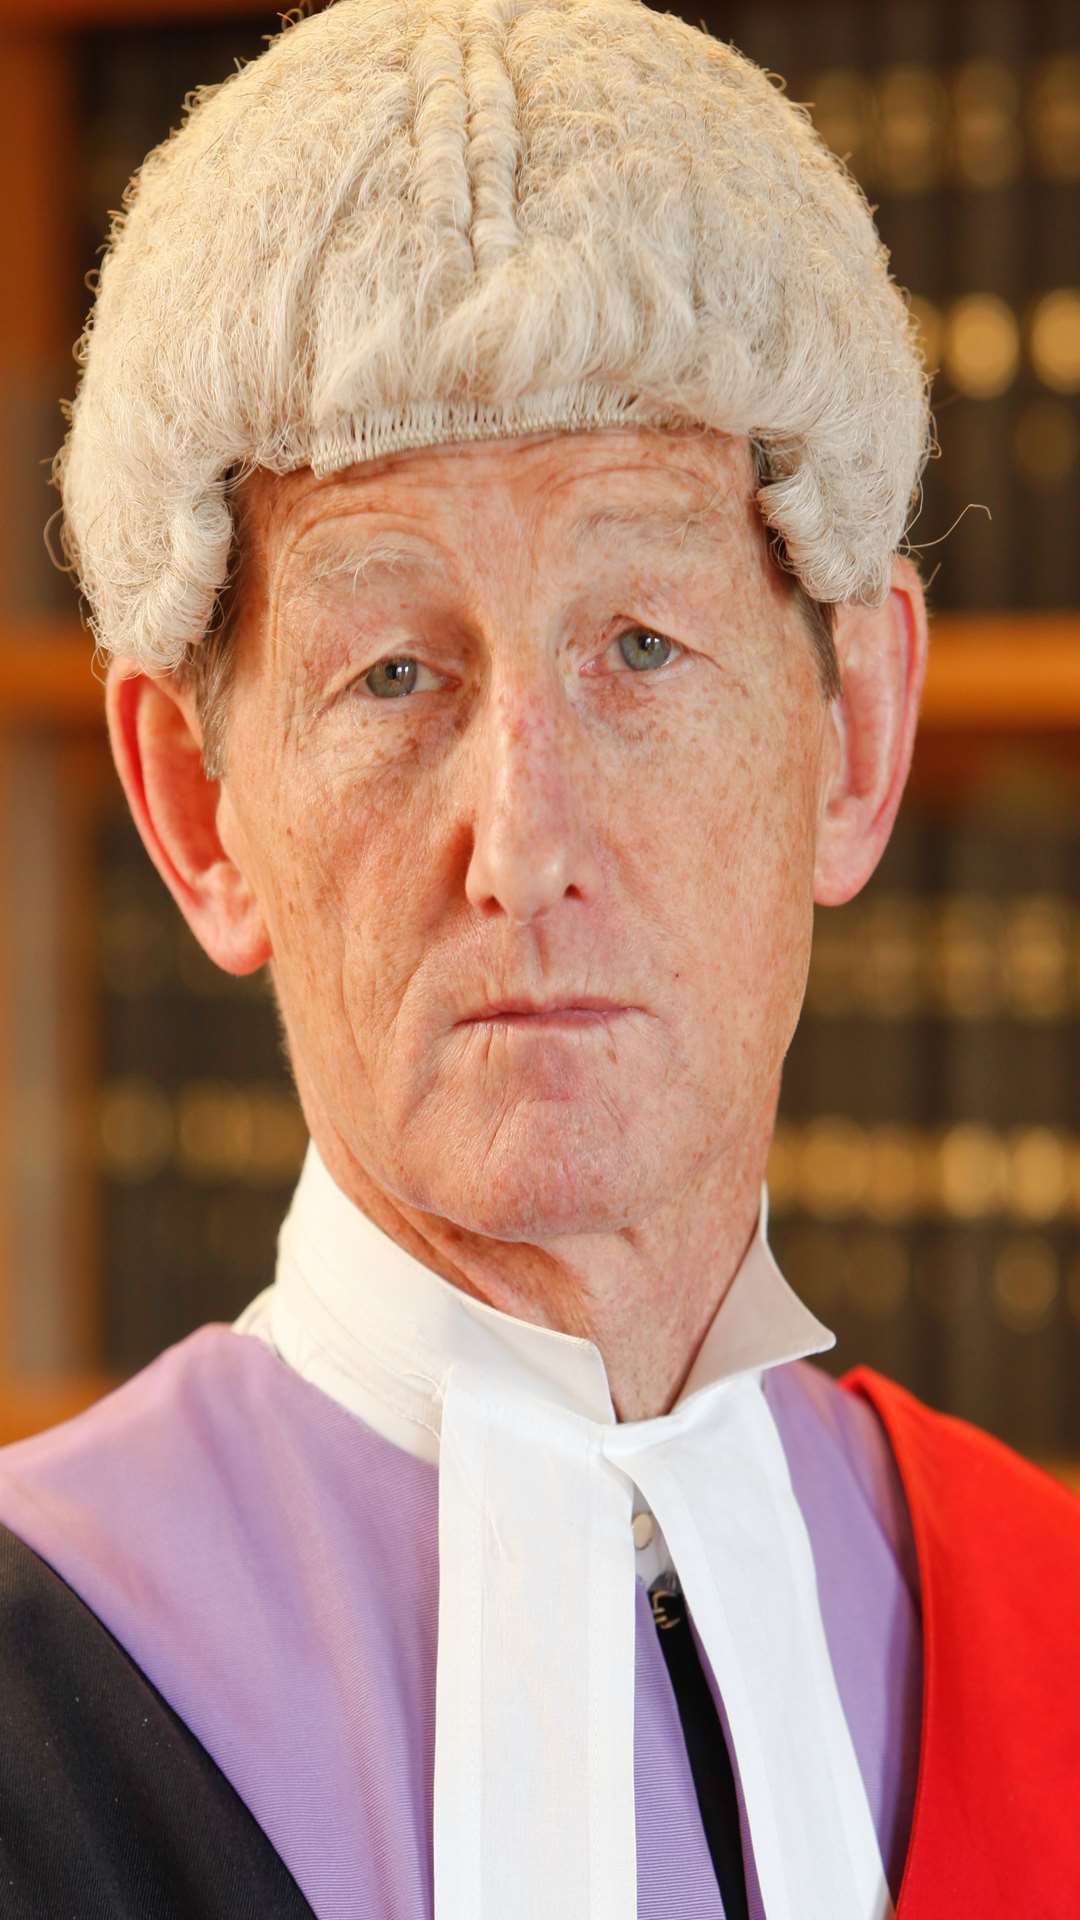 Judge Jeremy Carey told Migliorini: "You have learnt a bitter lesson"